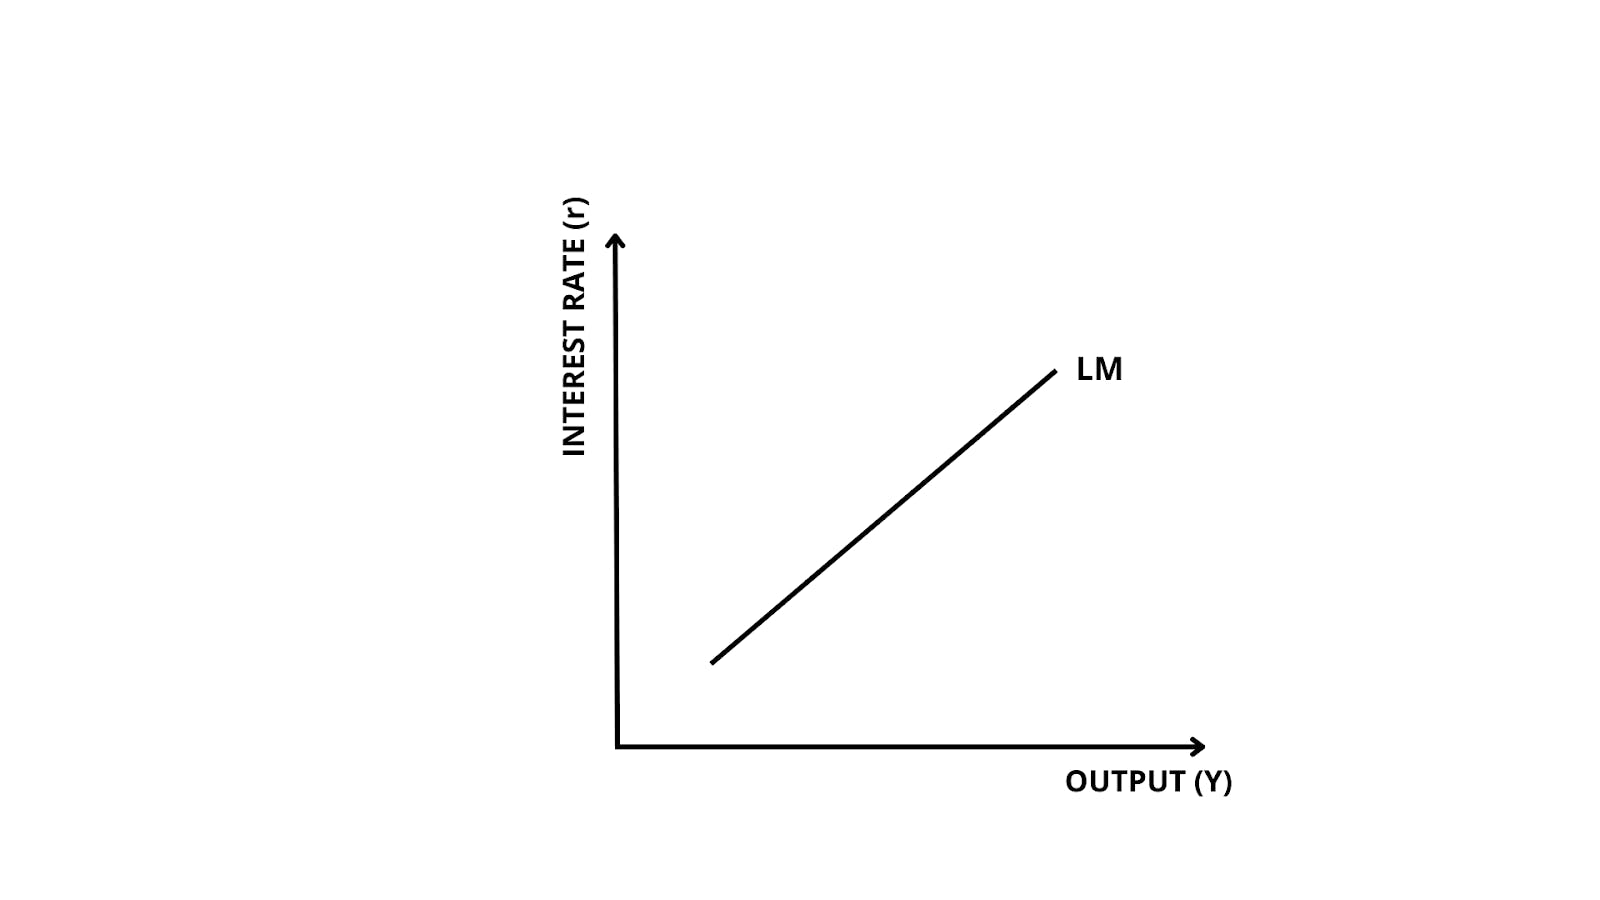 Graph of LM curve